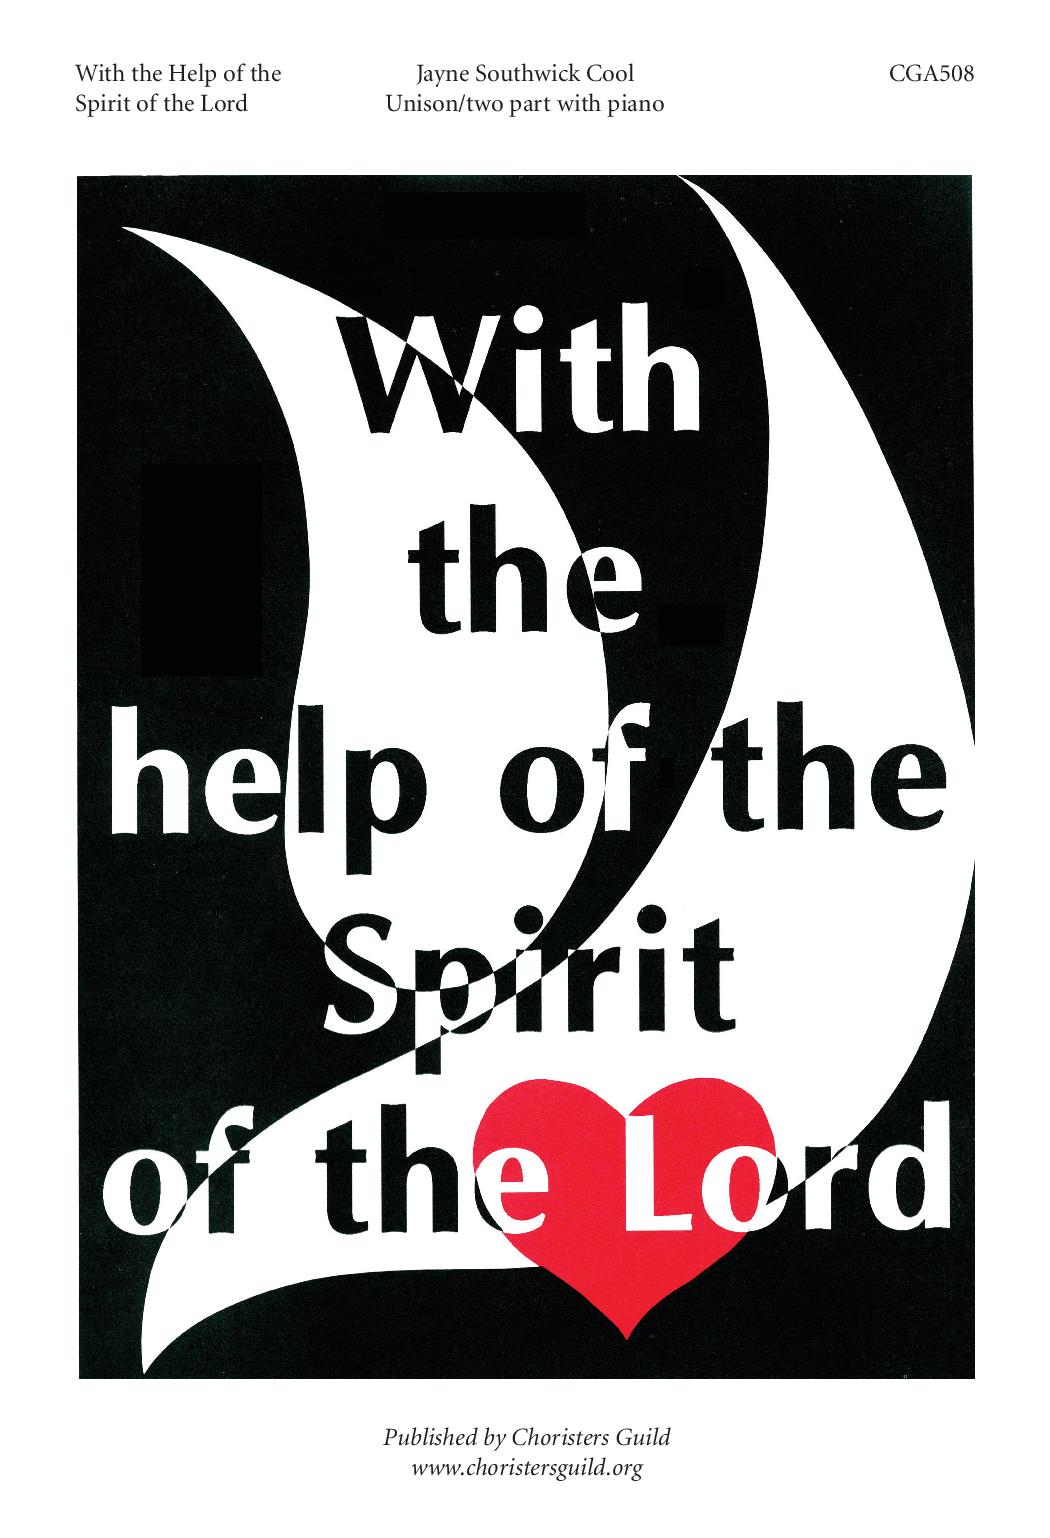 With the Help of the Spirit of the Lord